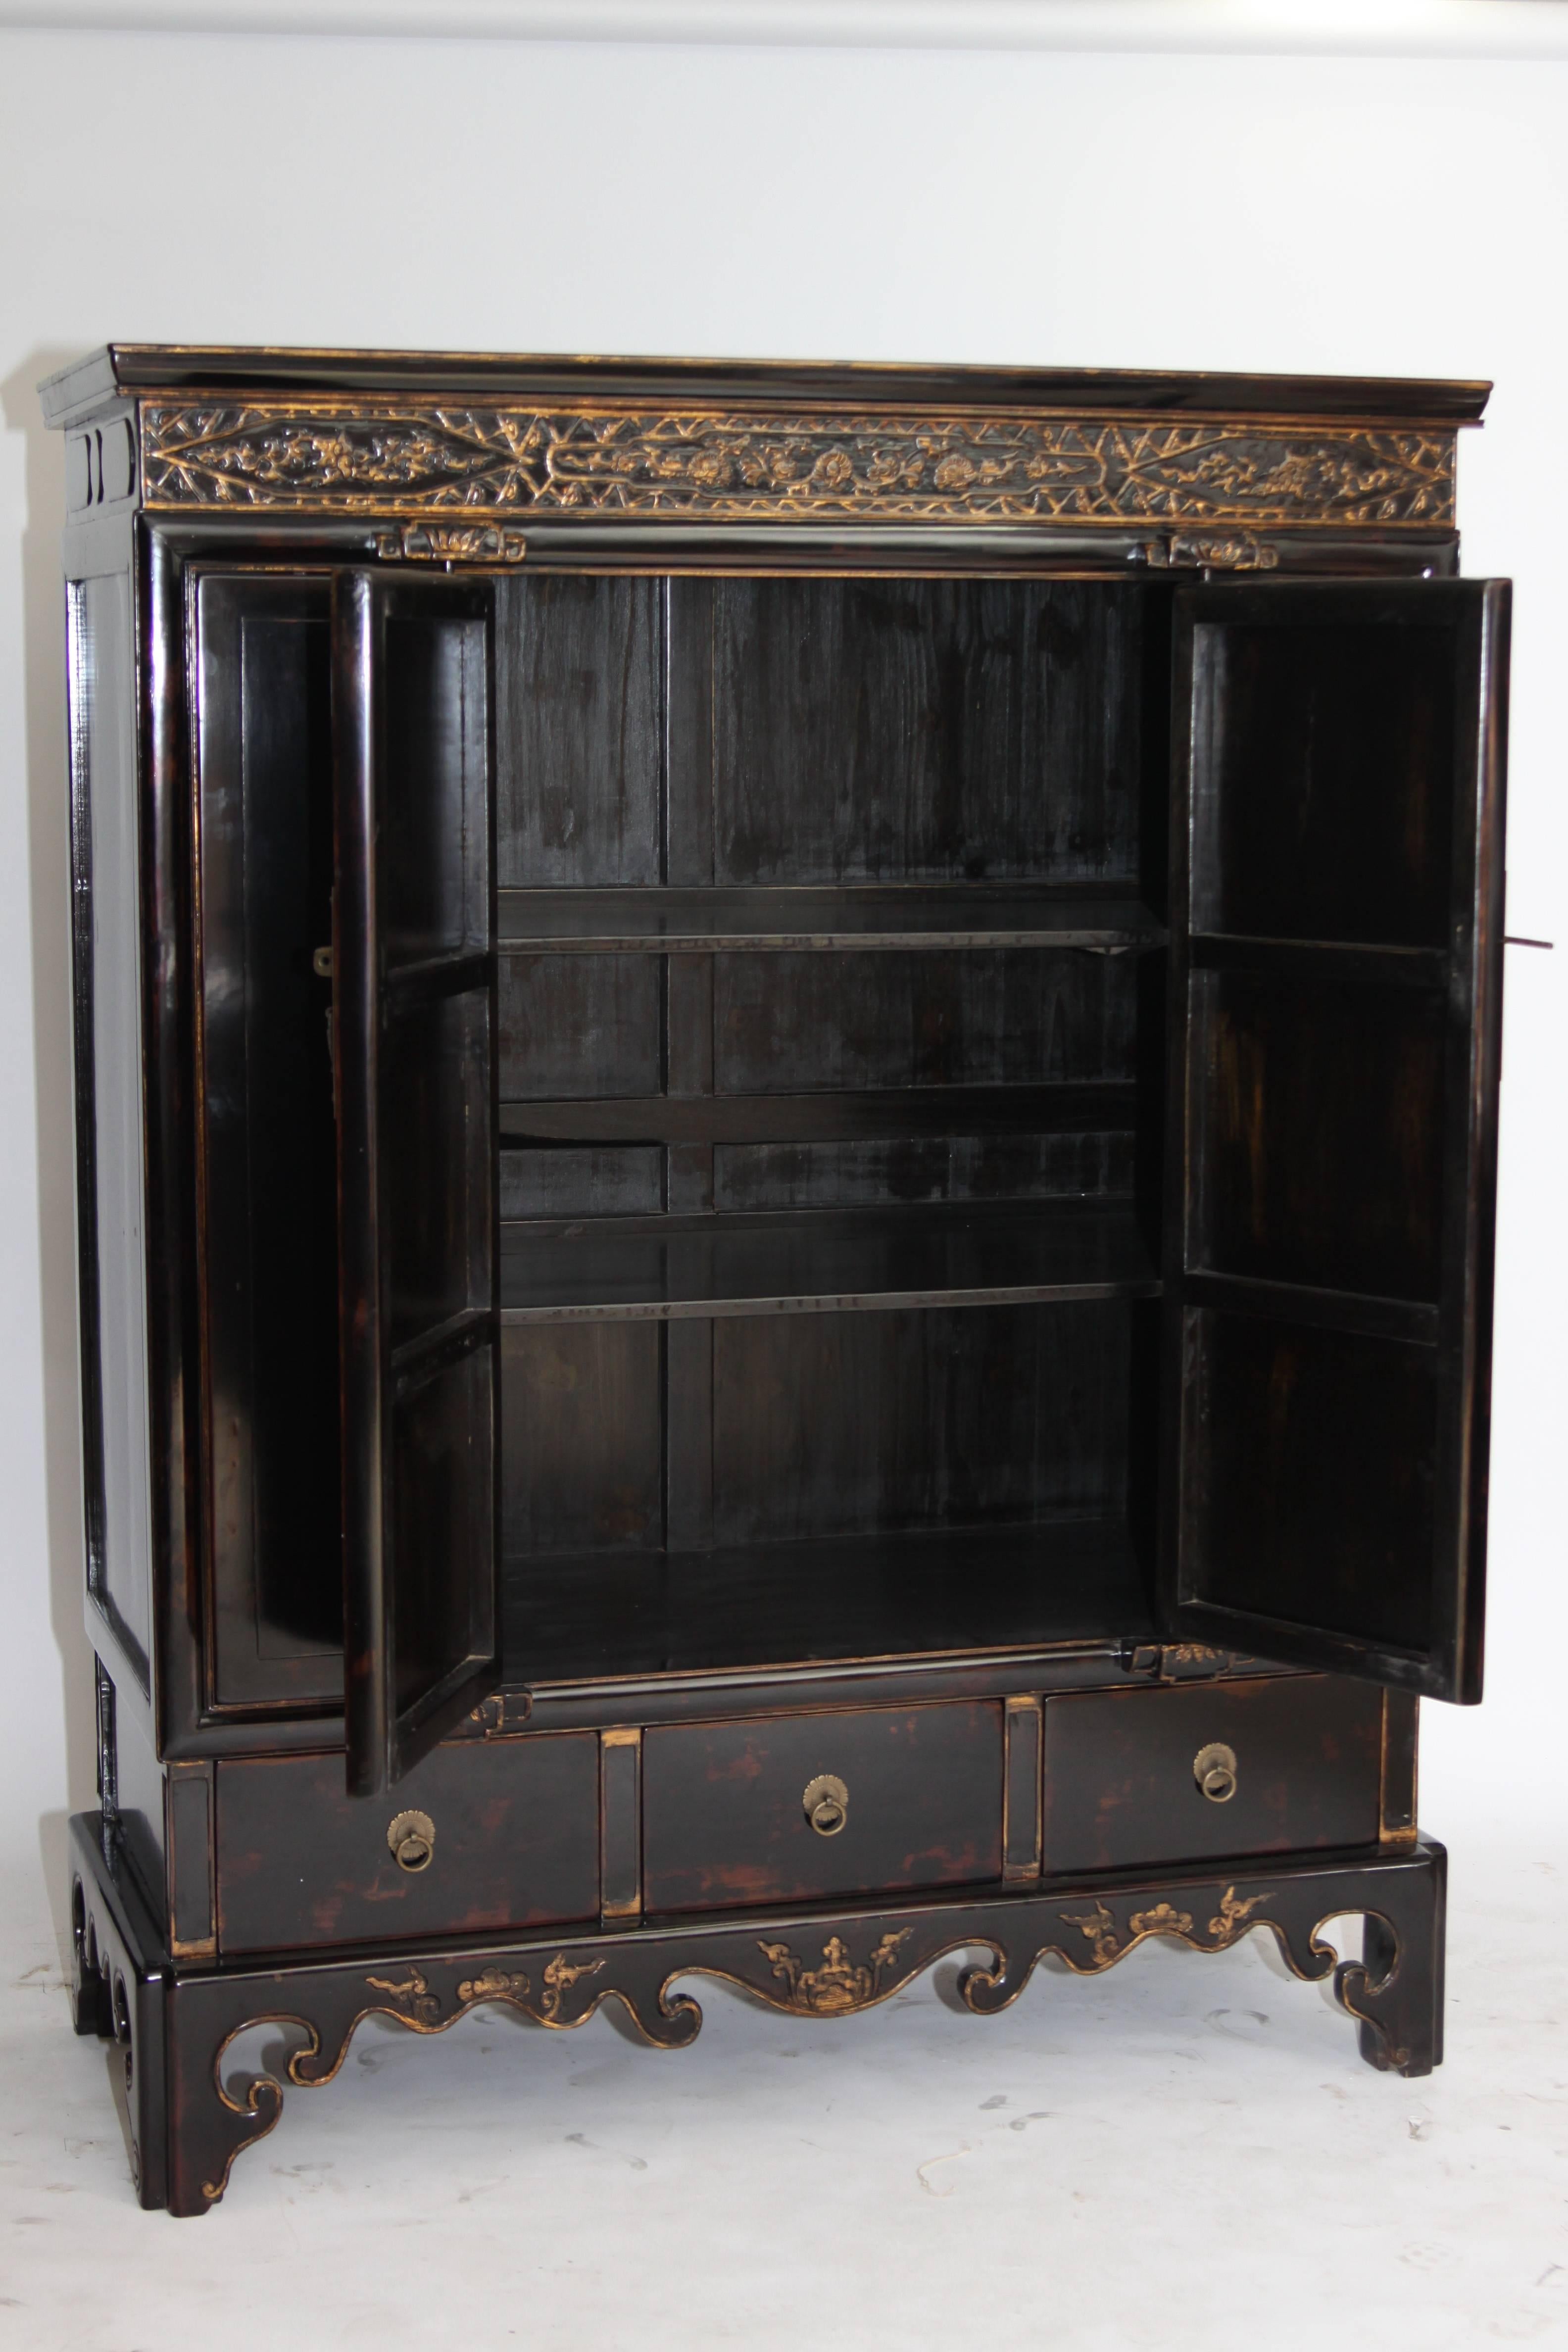 Hand-Carved 19th Century Chinoiserie Cabinet, Black Lacquer with Gilt Relief-Carved Motifs